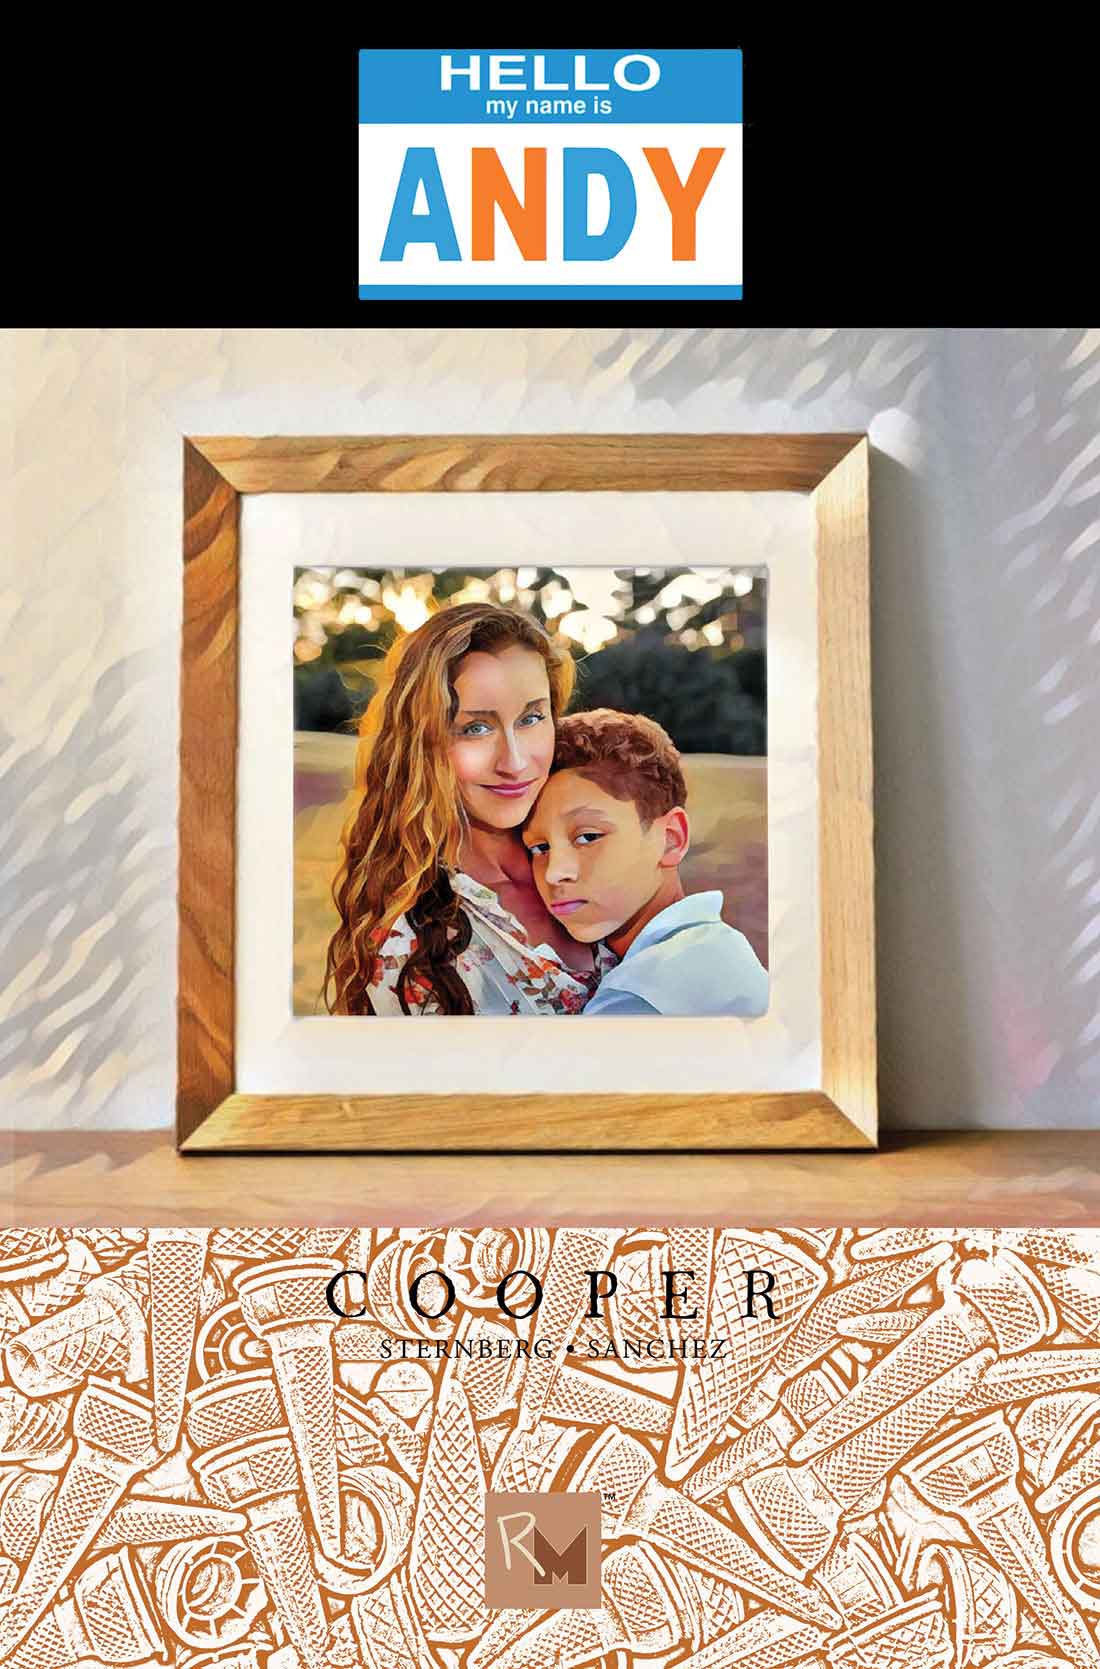 A wooden photo frame with the name "Andy" engraved on it, perfect for displaying cherished memories